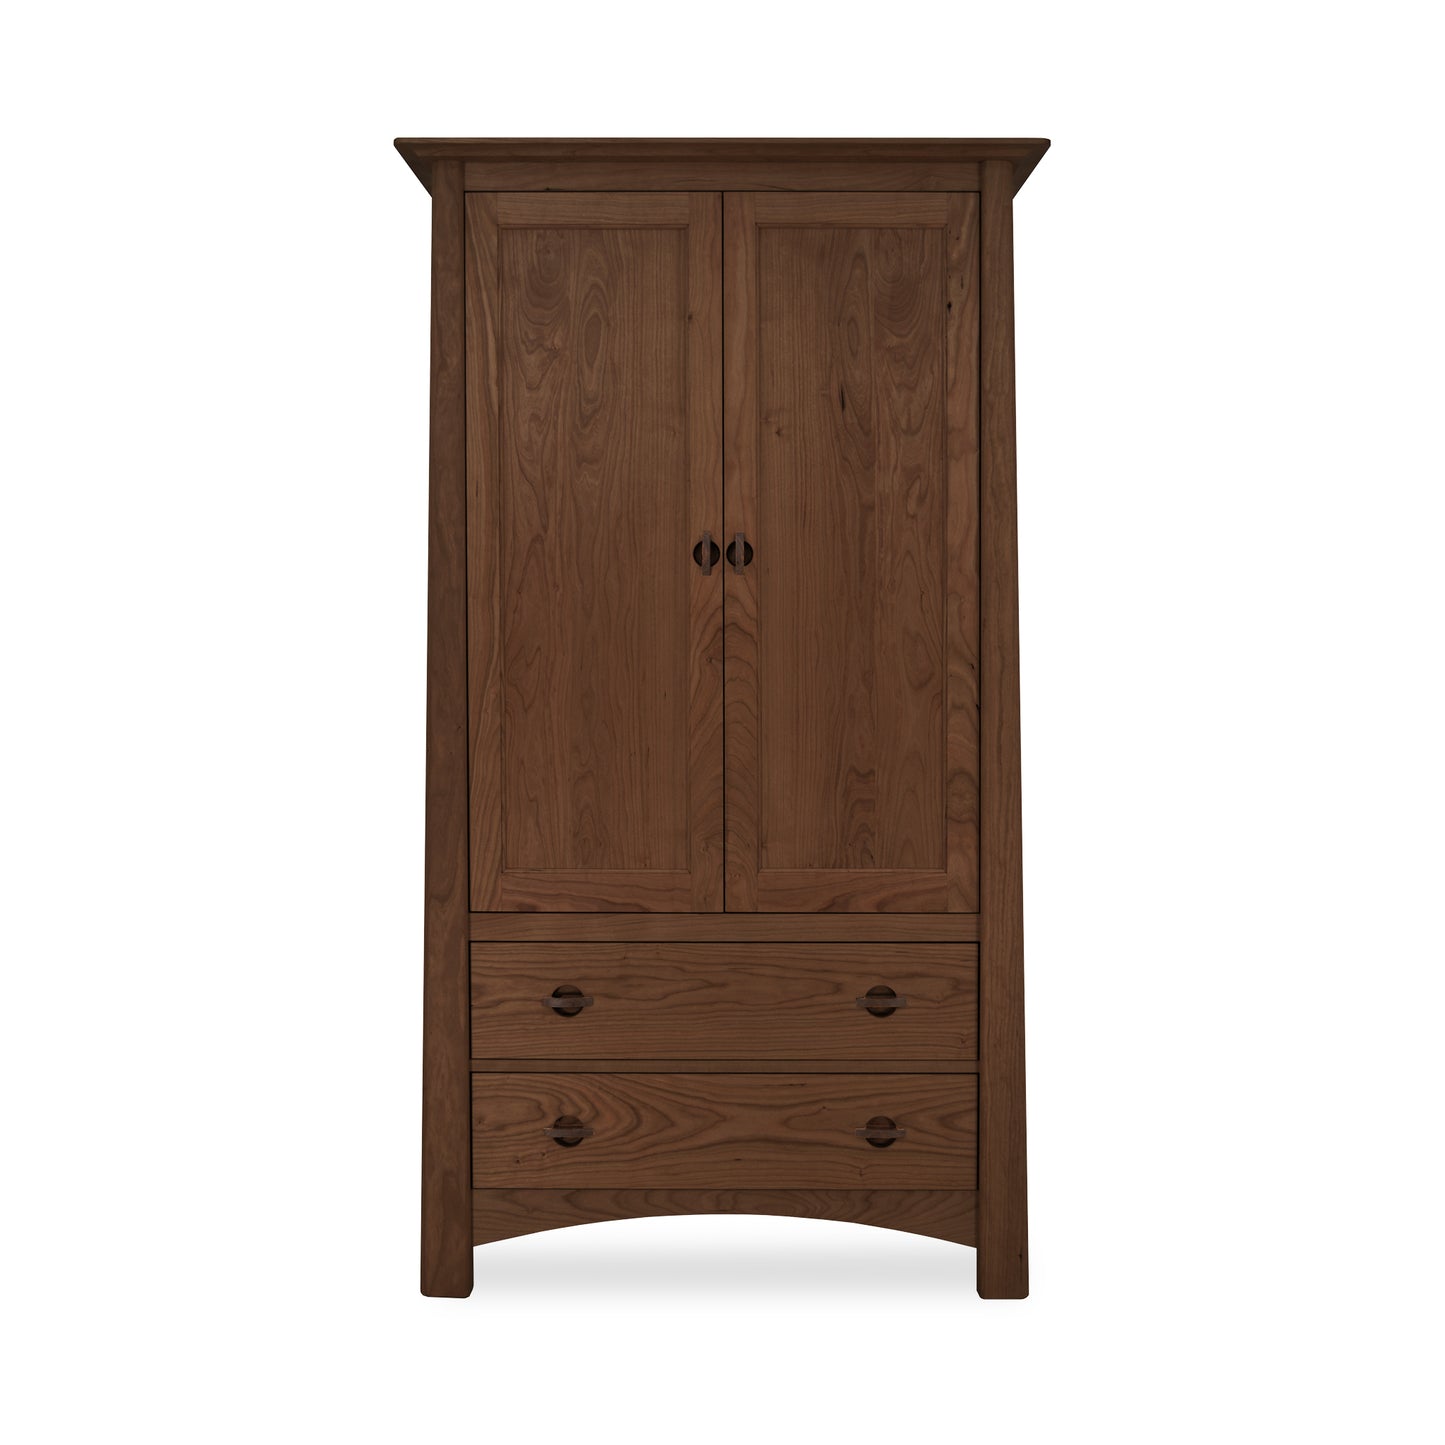 A luxurious Cherry Moon Armoire from Maple Corner Woodworks with a dark stain featuring two doors and a bottom drawer, set against a plain white background.